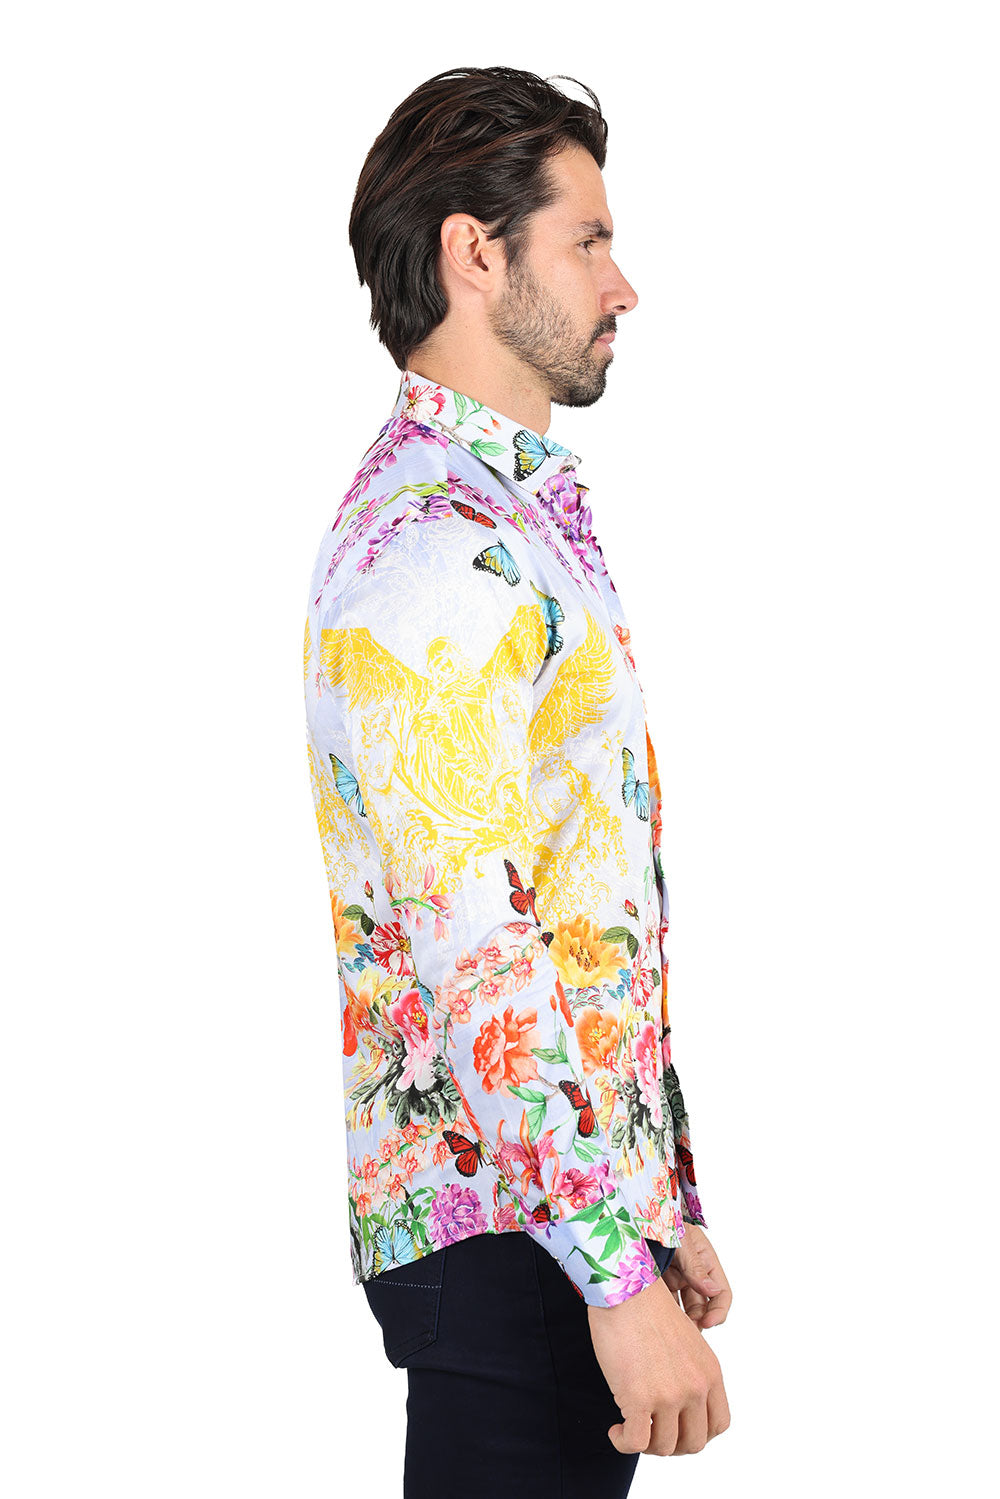 Barabas Men's floral butterfly bird printed Long Sleeve Shirts 2SP38 2SP38 Red